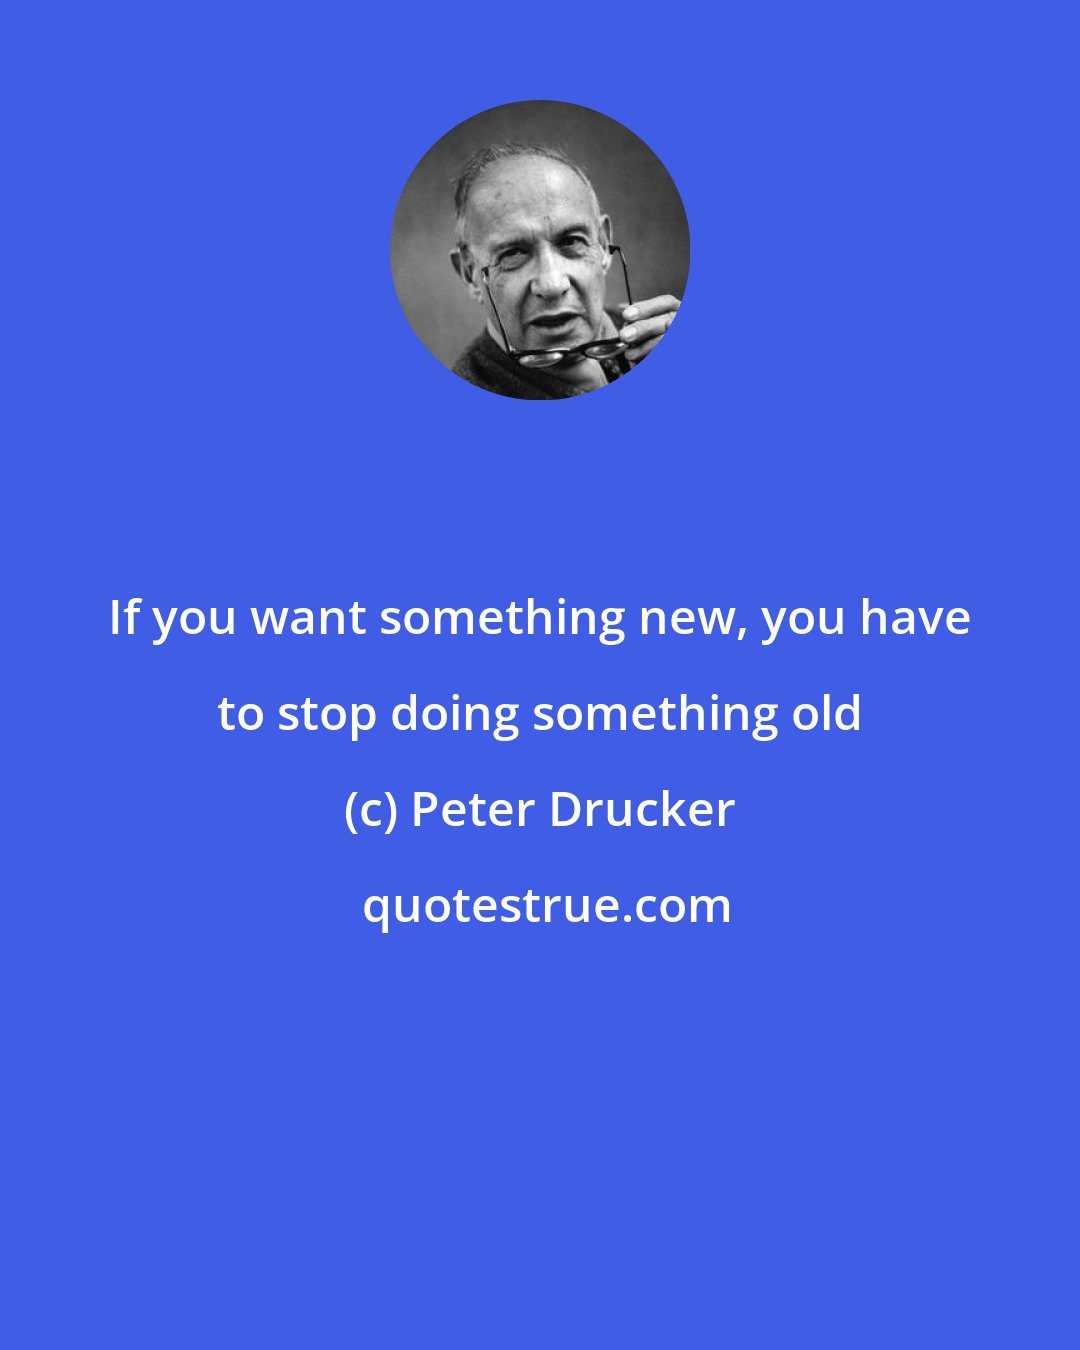 Peter Drucker: If you want something new, you have to stop doing something old